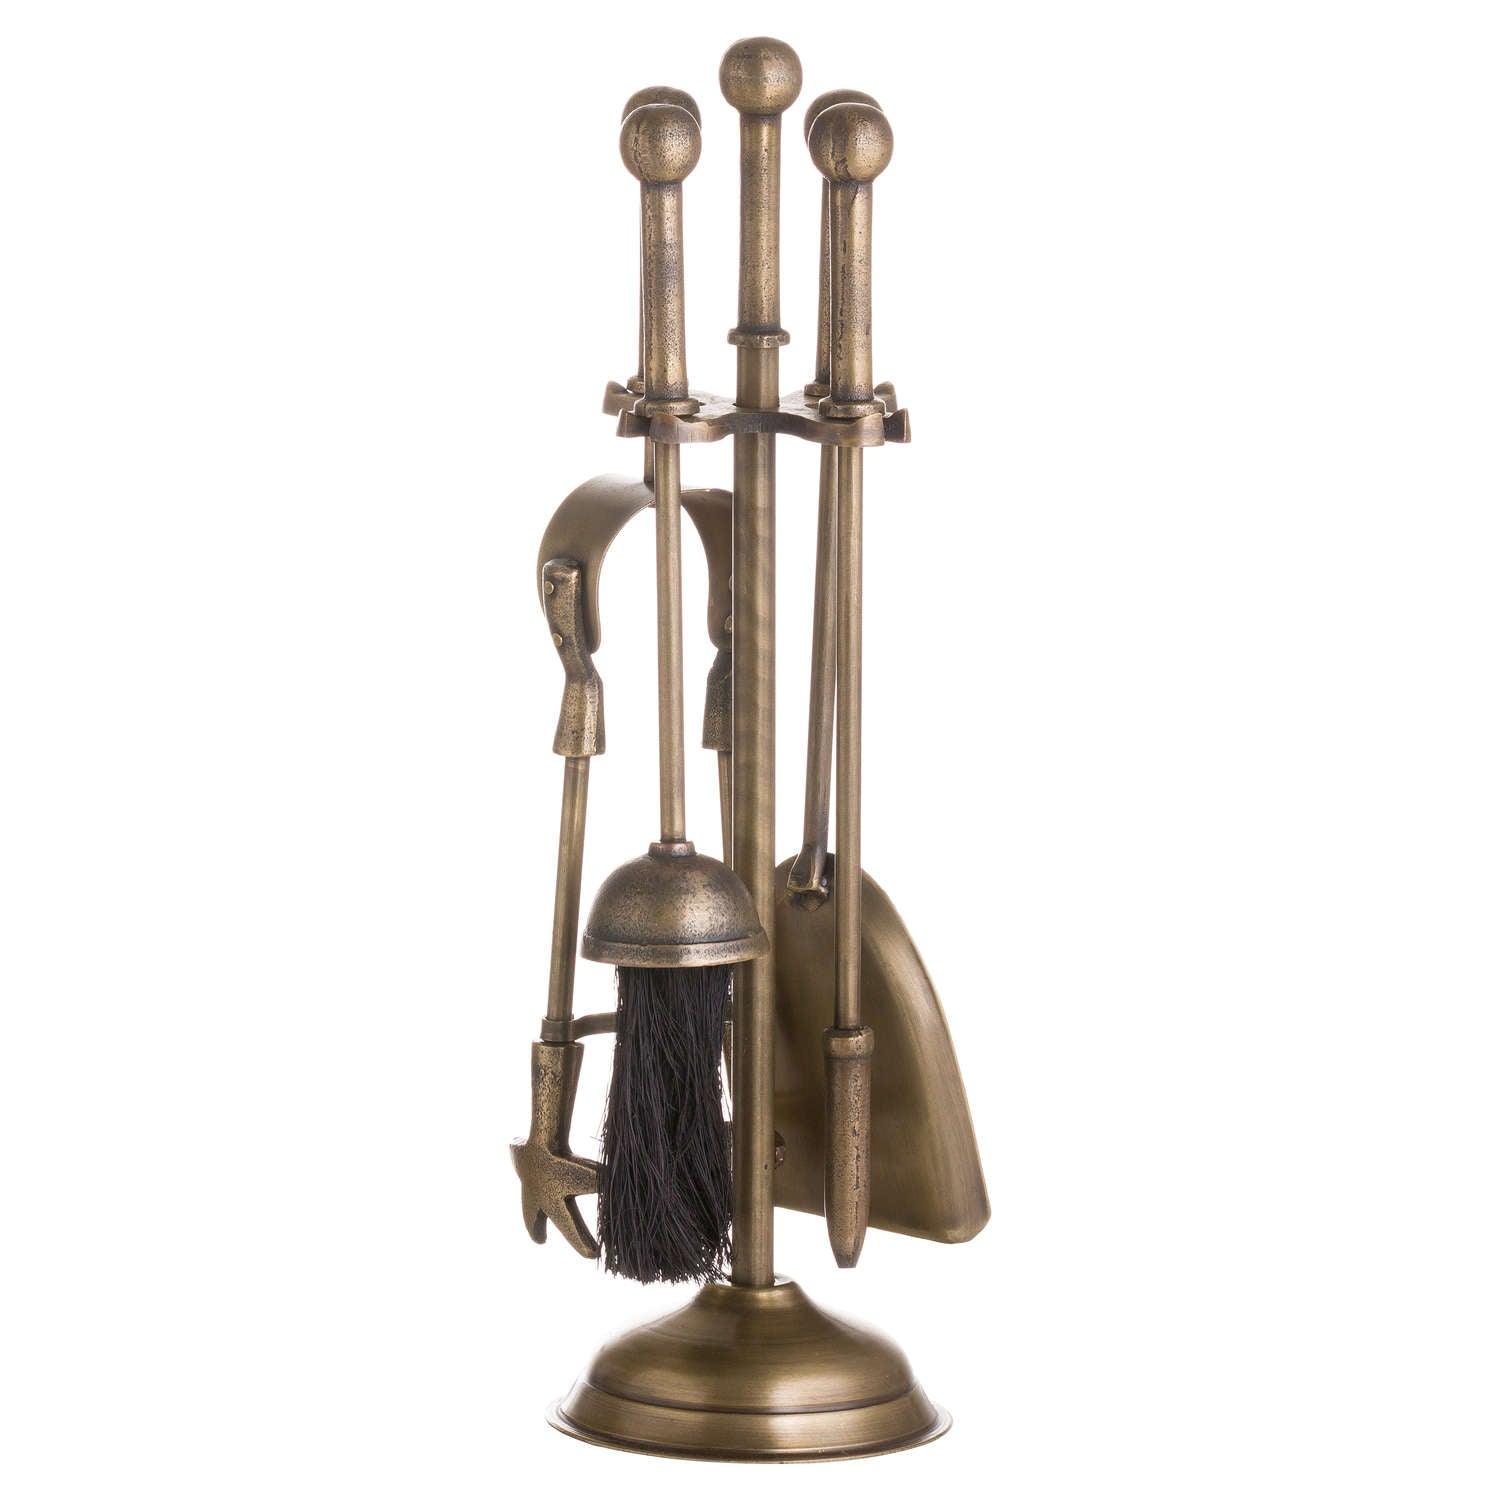 Ball Topped Companion Set In Antique Brass - Vookoo Lifestyle